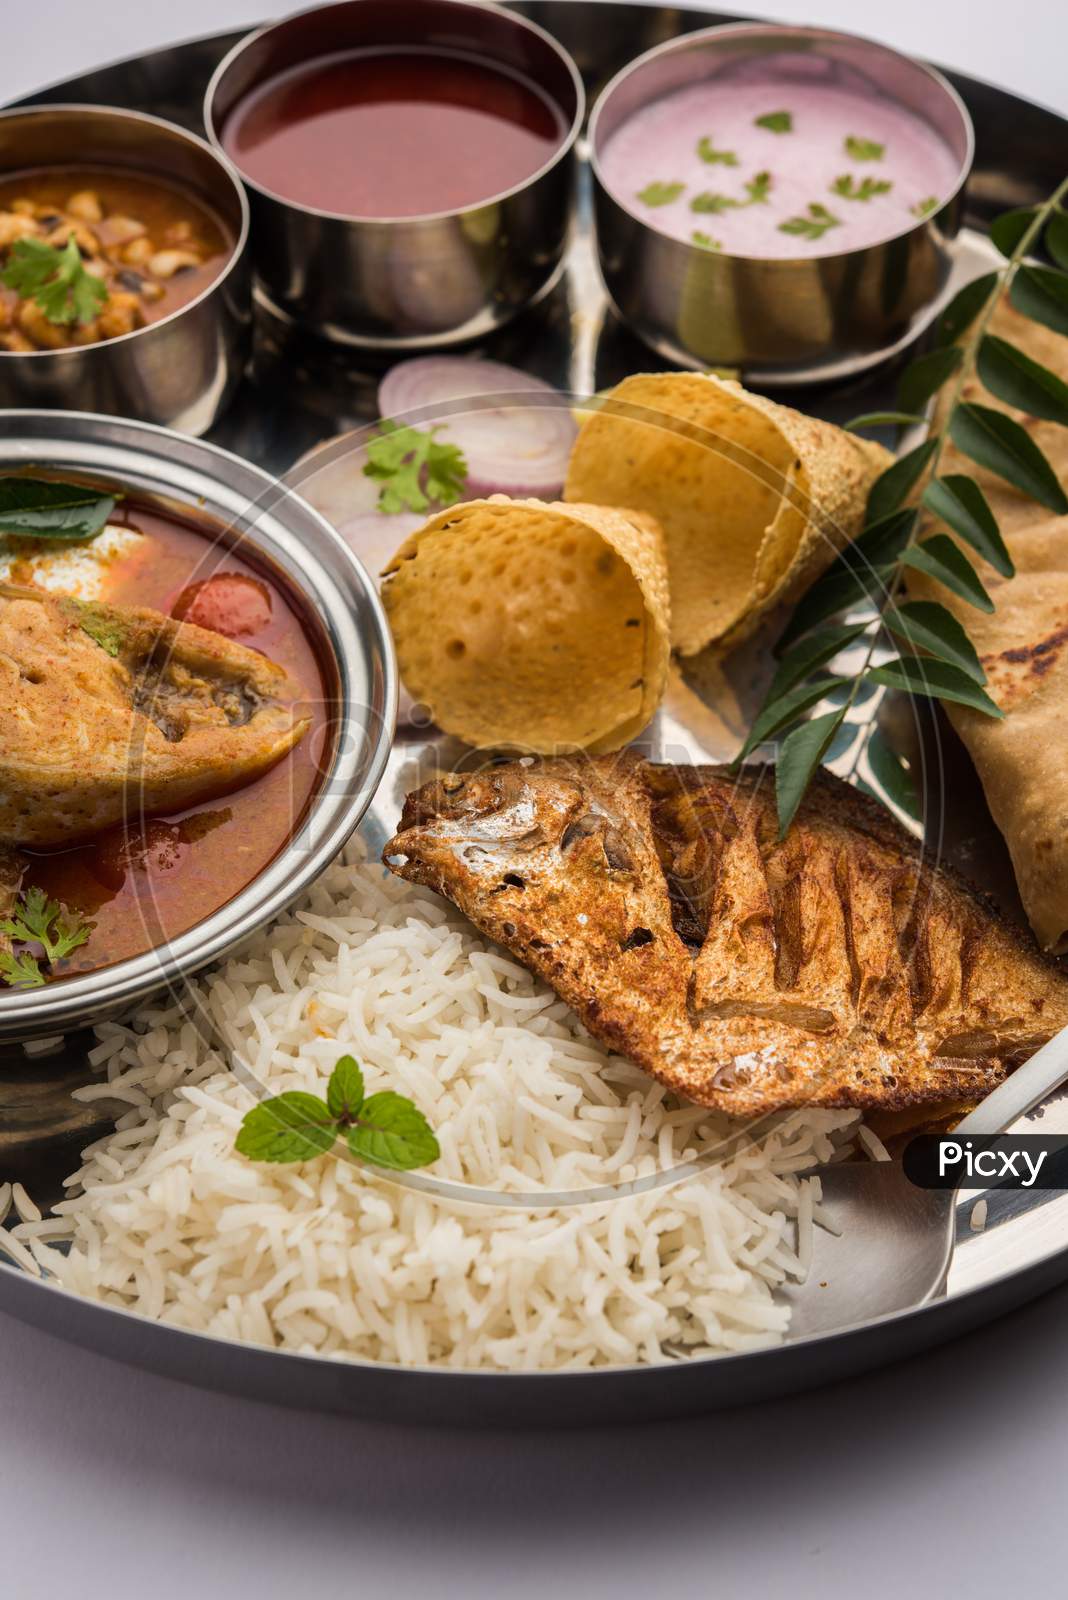 Indian Fish Platter Or Seafood Thali Served In A Steel Plate Or Over Banana Leaf